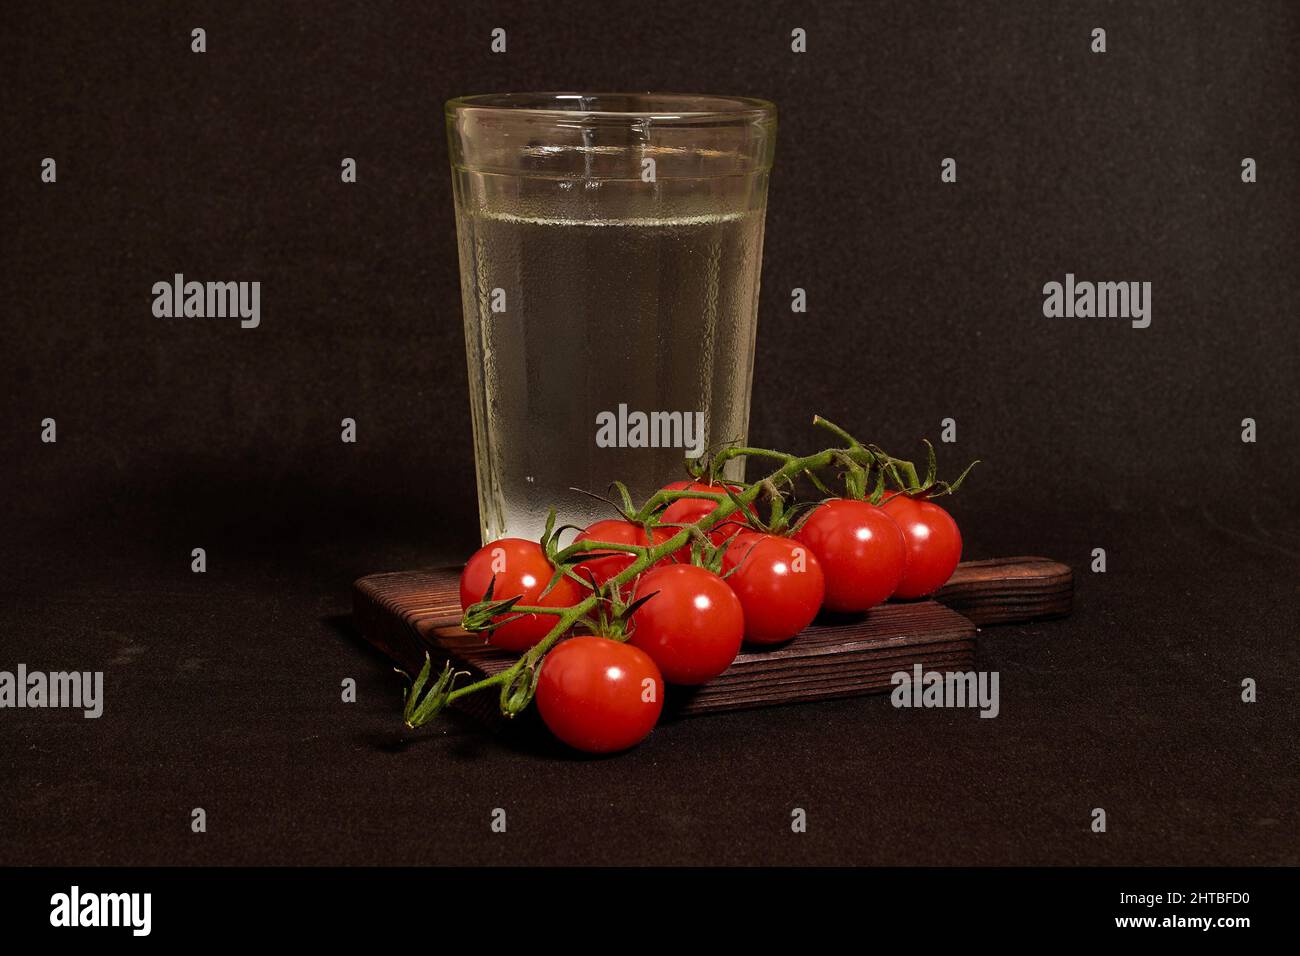 A faceted glass of vodka and a branch of cherry tomatoes on a wooden stand  Stock Photo